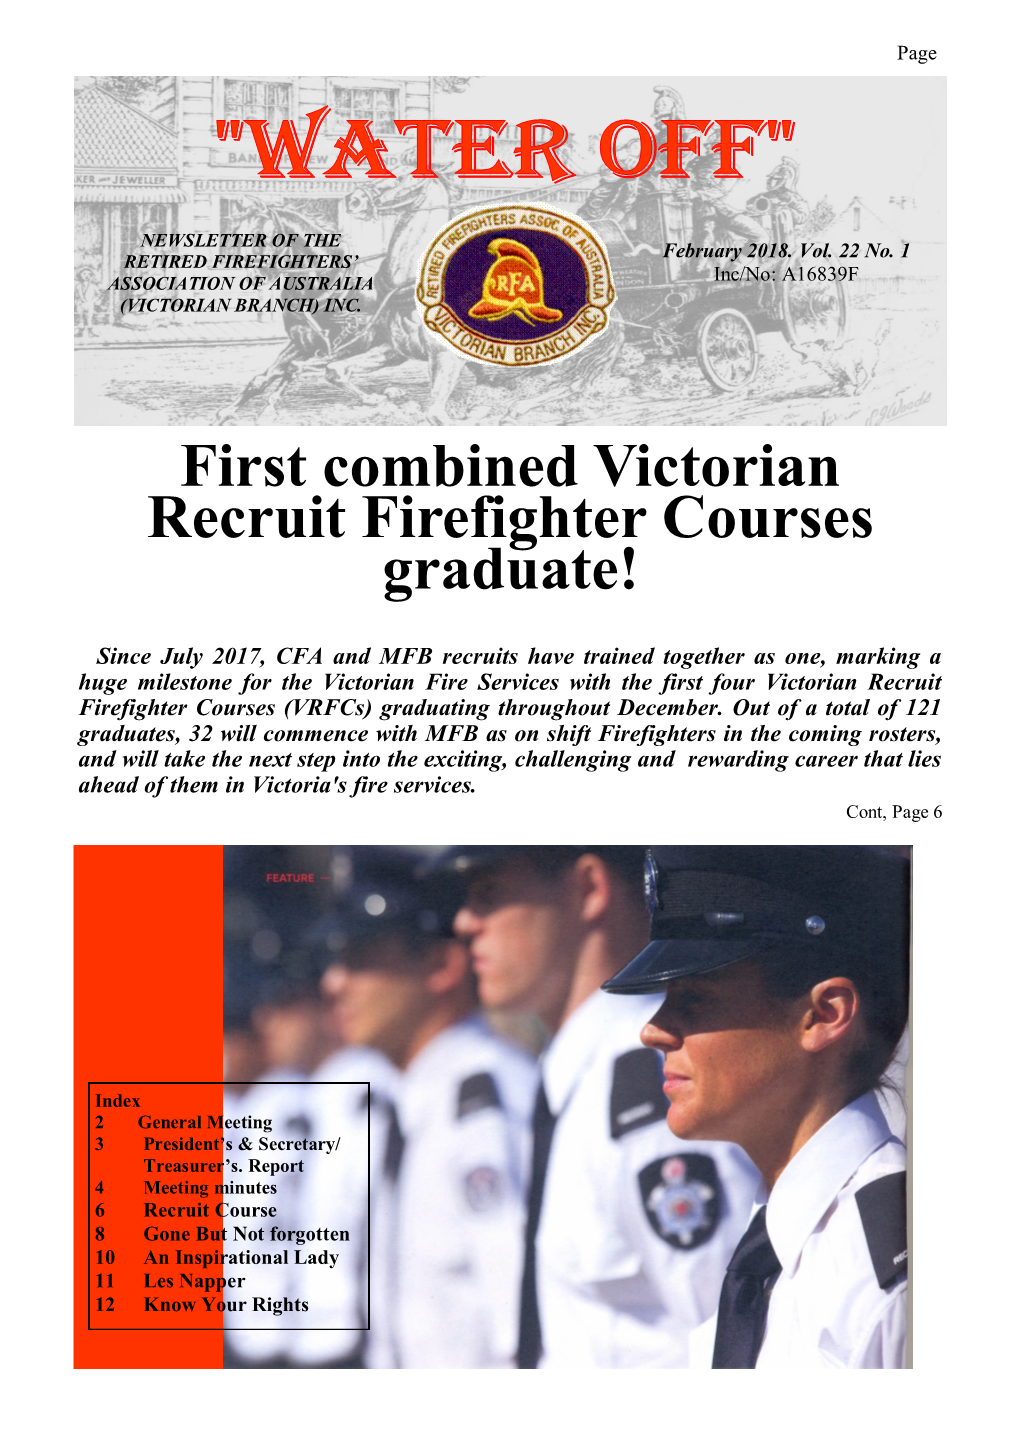 First Combined Victorian Recruit Firefighter Courses Graduate!